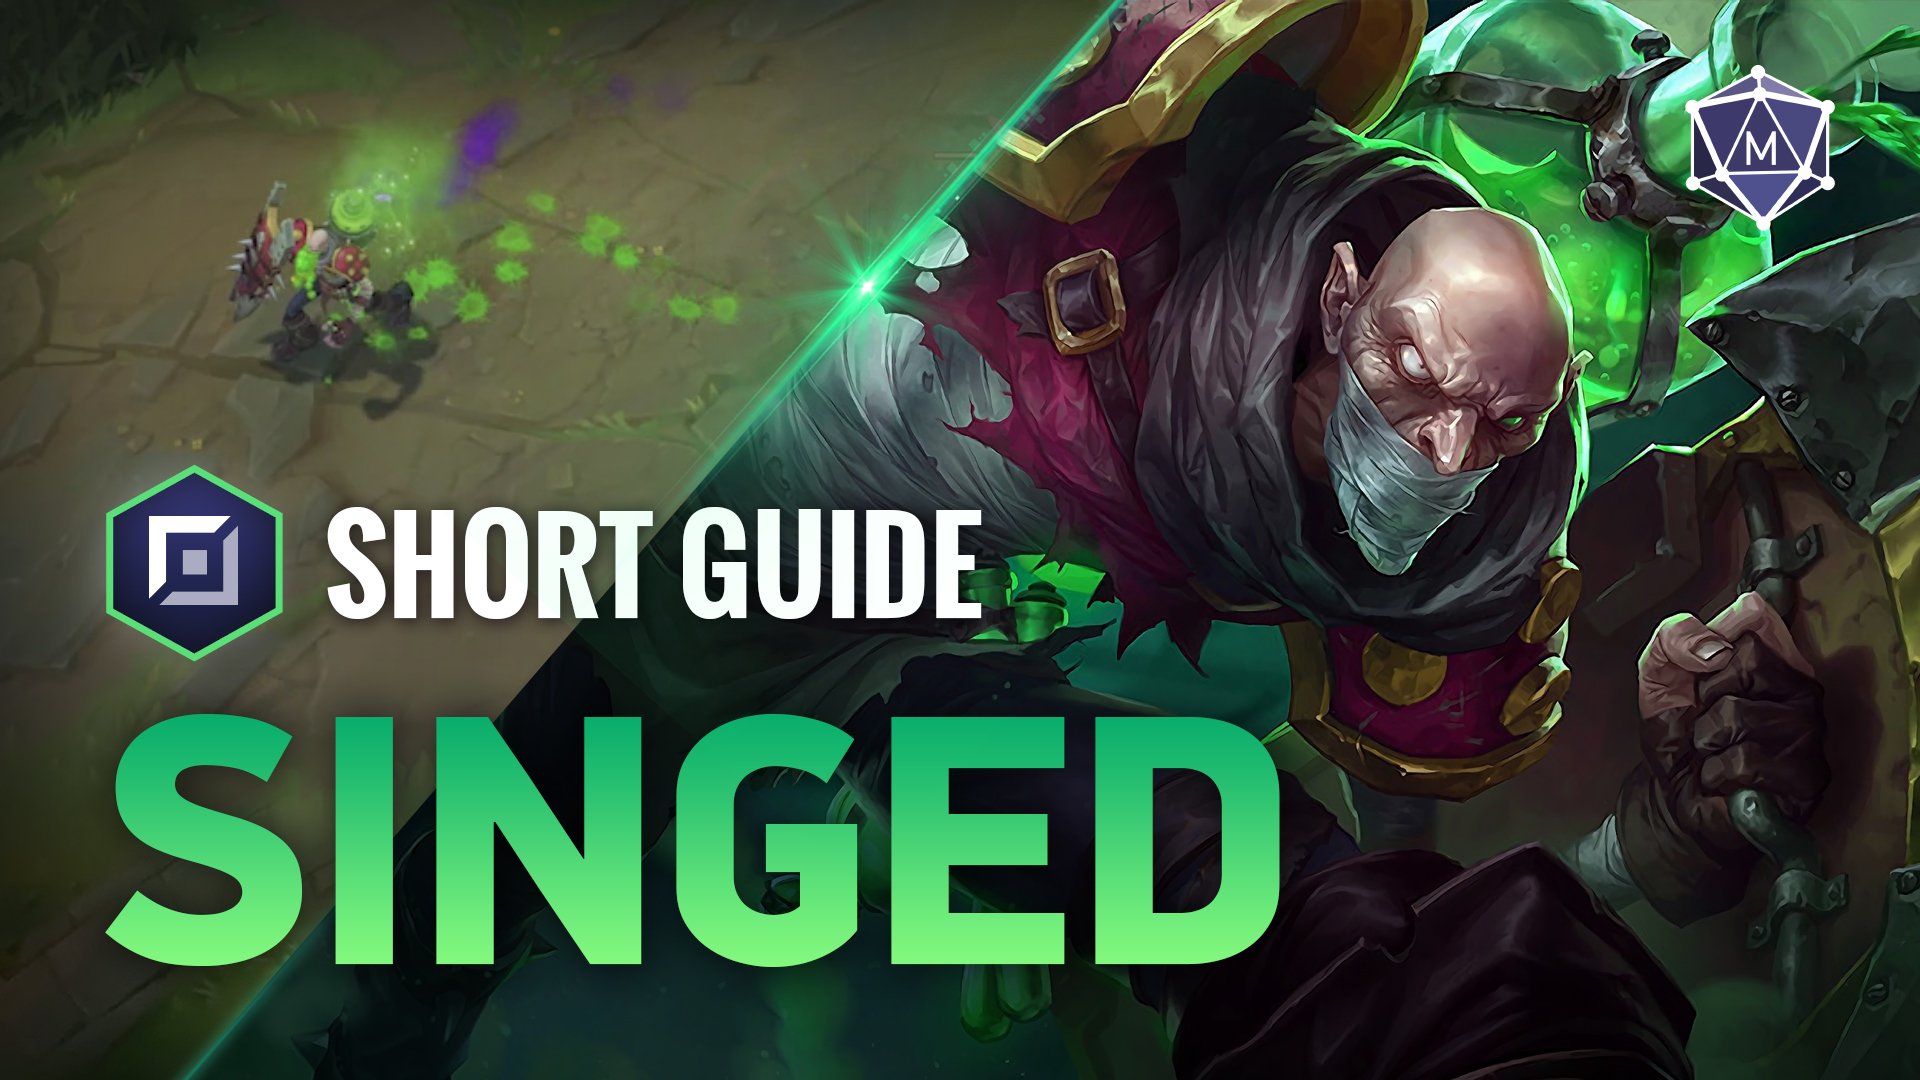 Singed expert guide